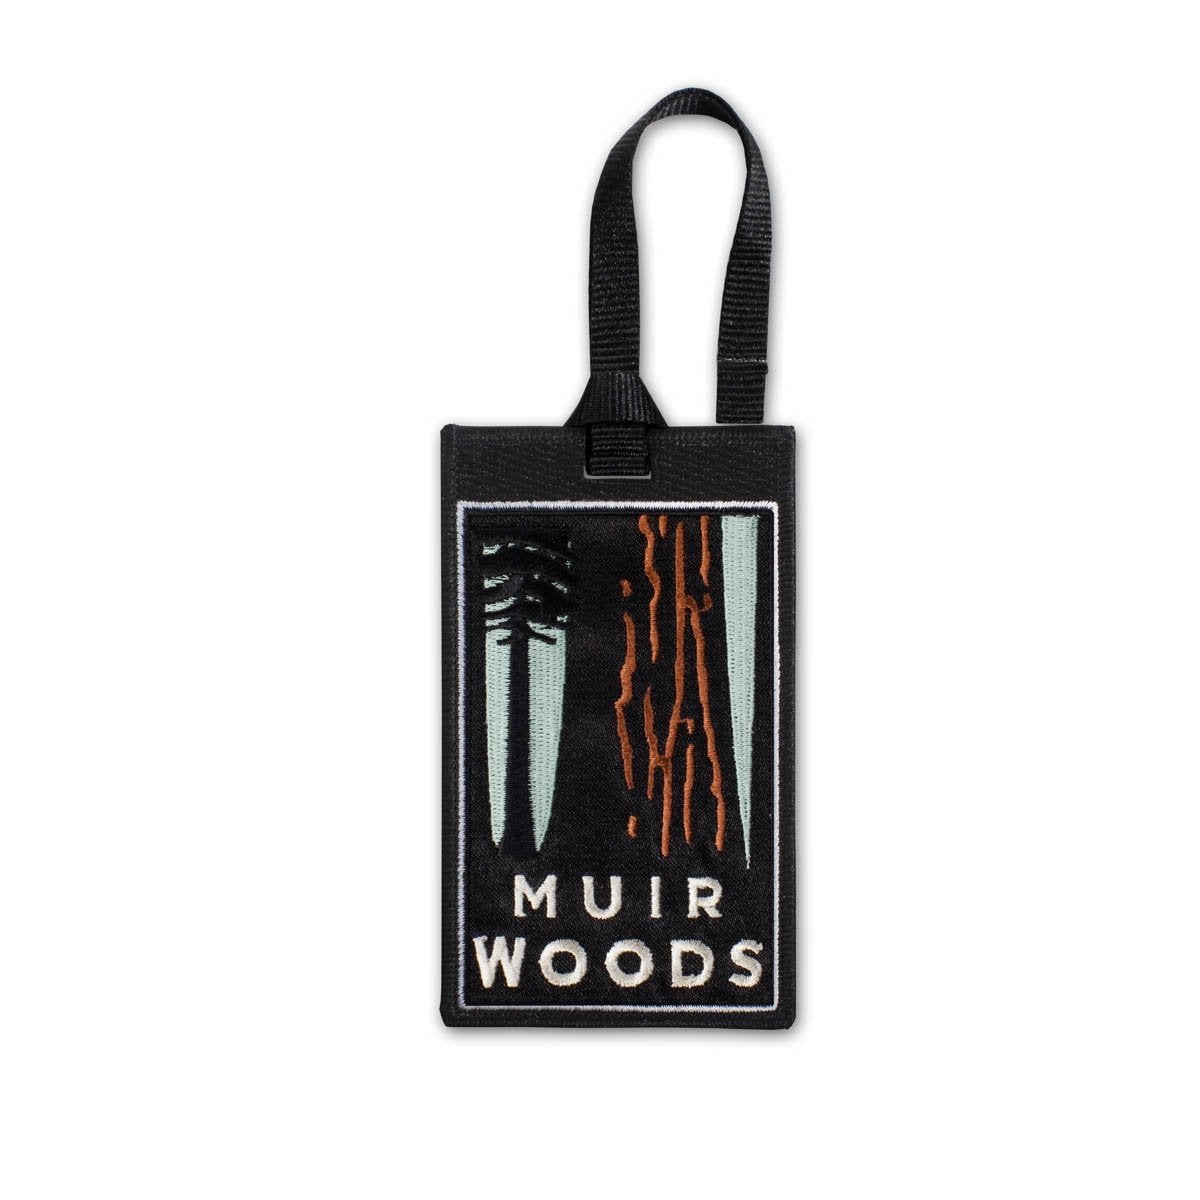 Multicolor embroidered luggage tag with design of Muir Woods trees, based on artwork by Michael Schwab.